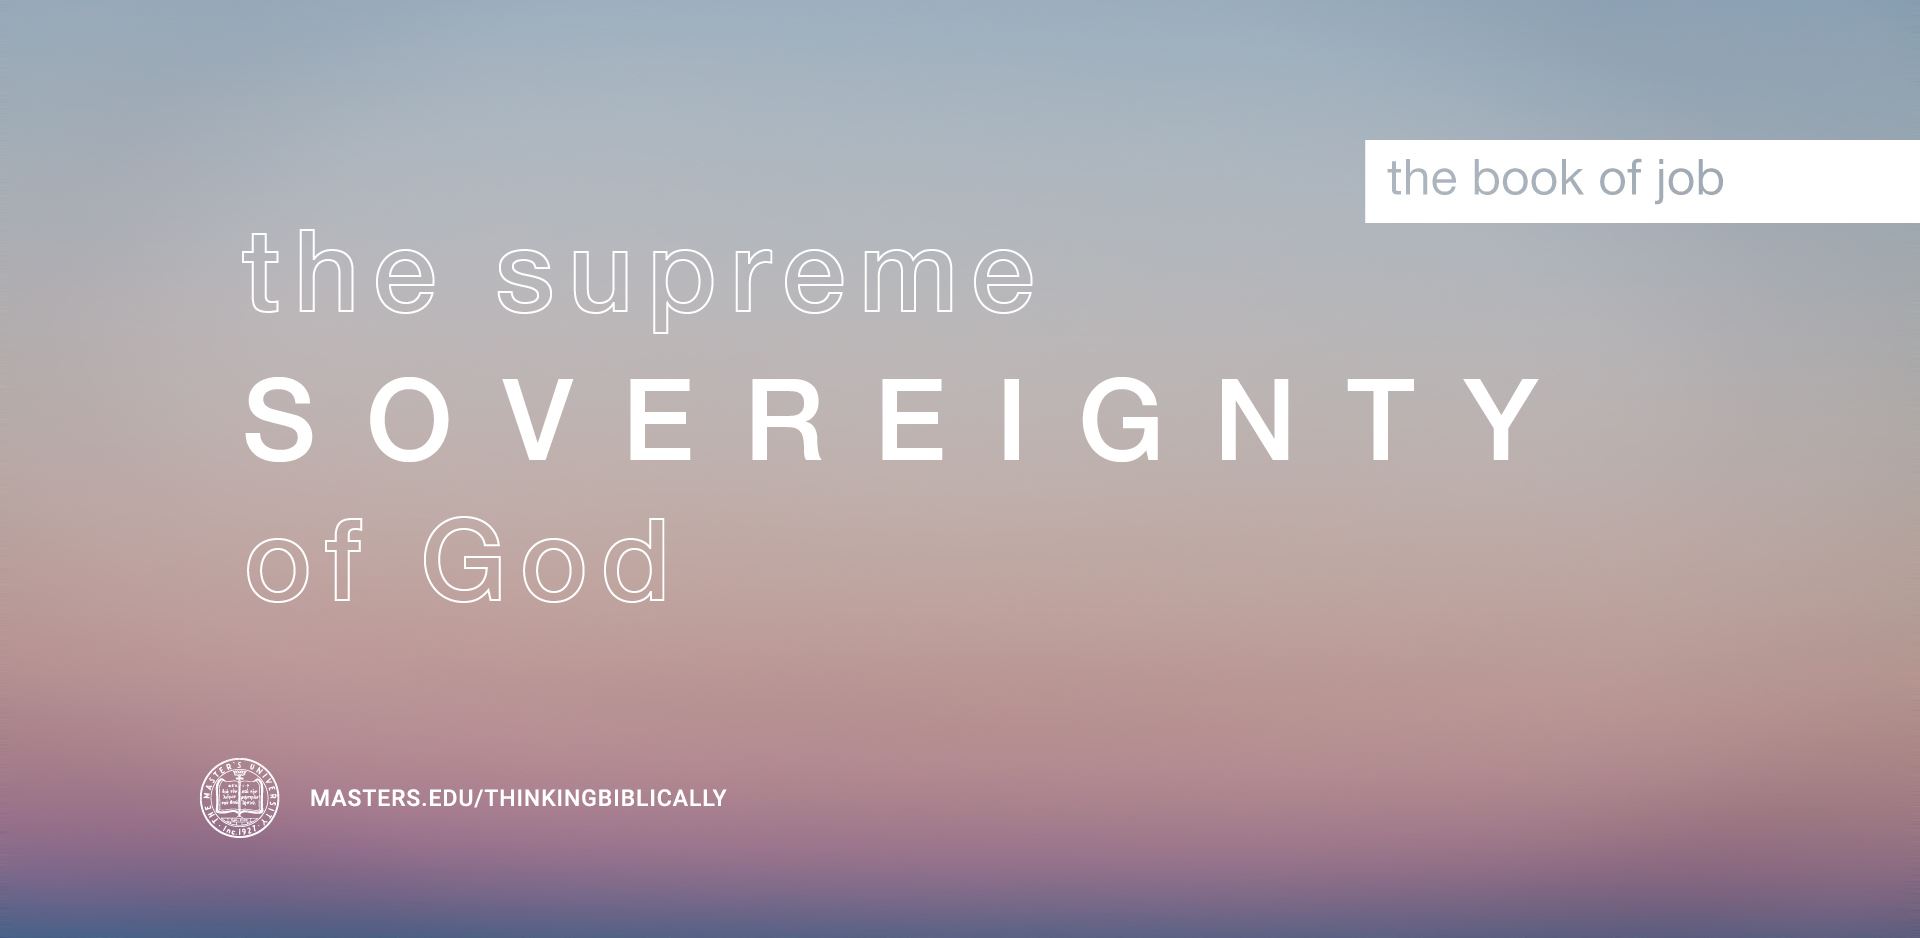 The Supreme Sovereignty of God Featured Image